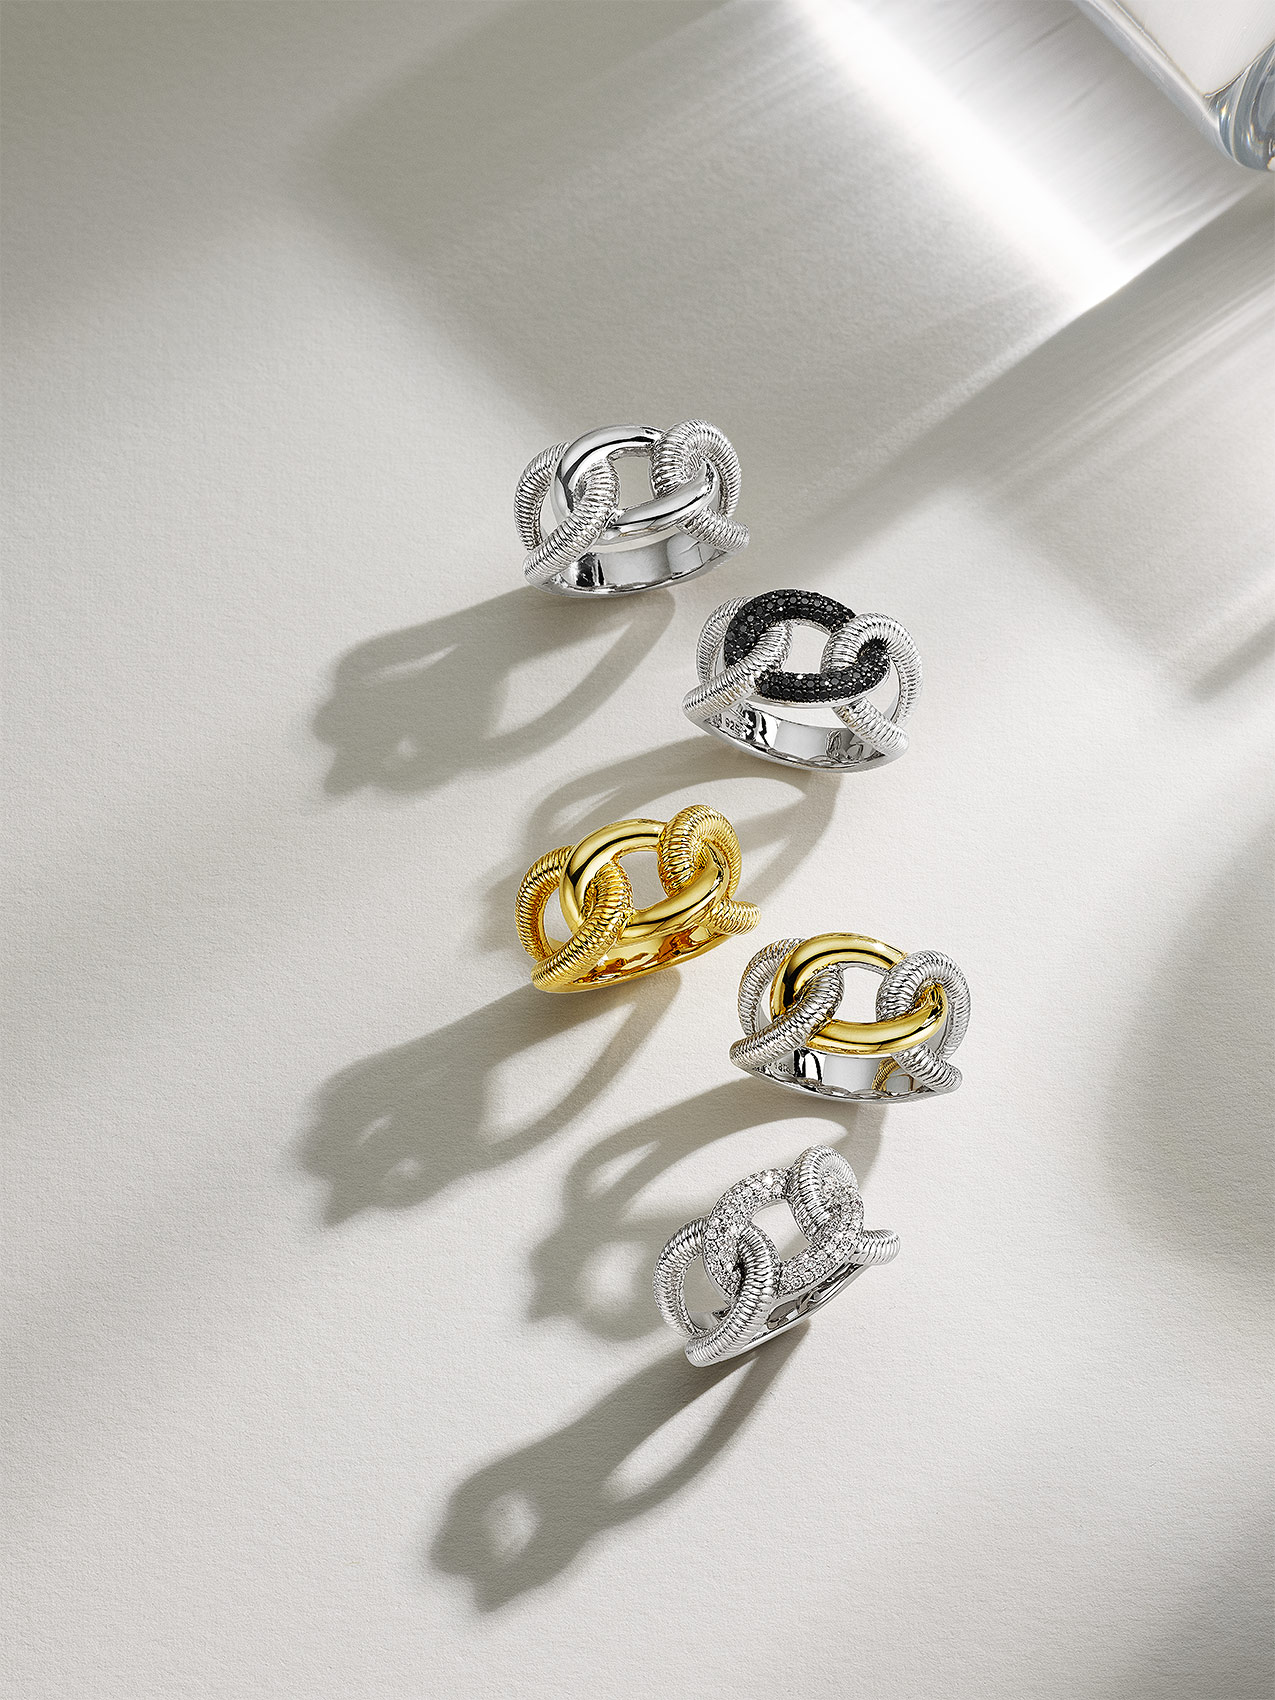 Gold and Diamond Rings with Shadows